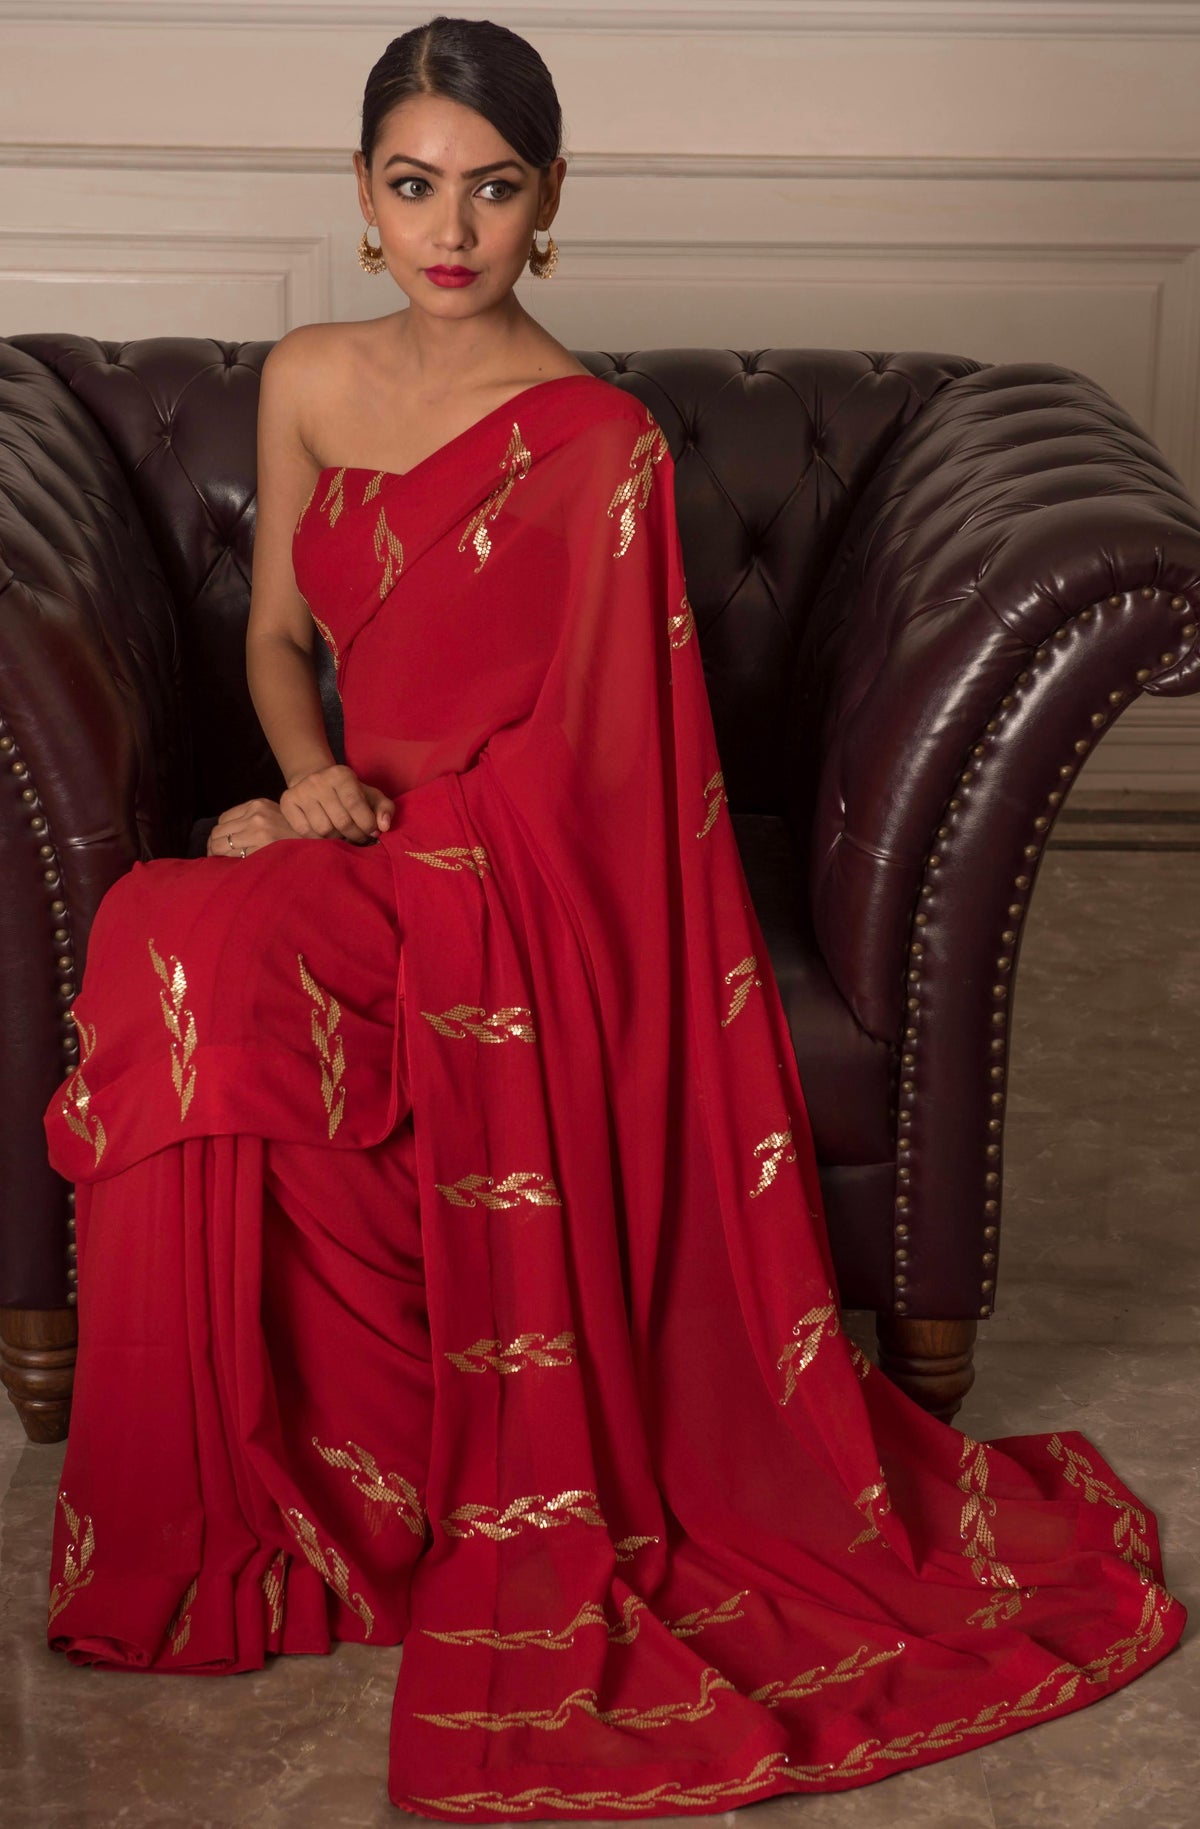 Scarlet red leaf pattern embroidered saree and blouse - Sohni